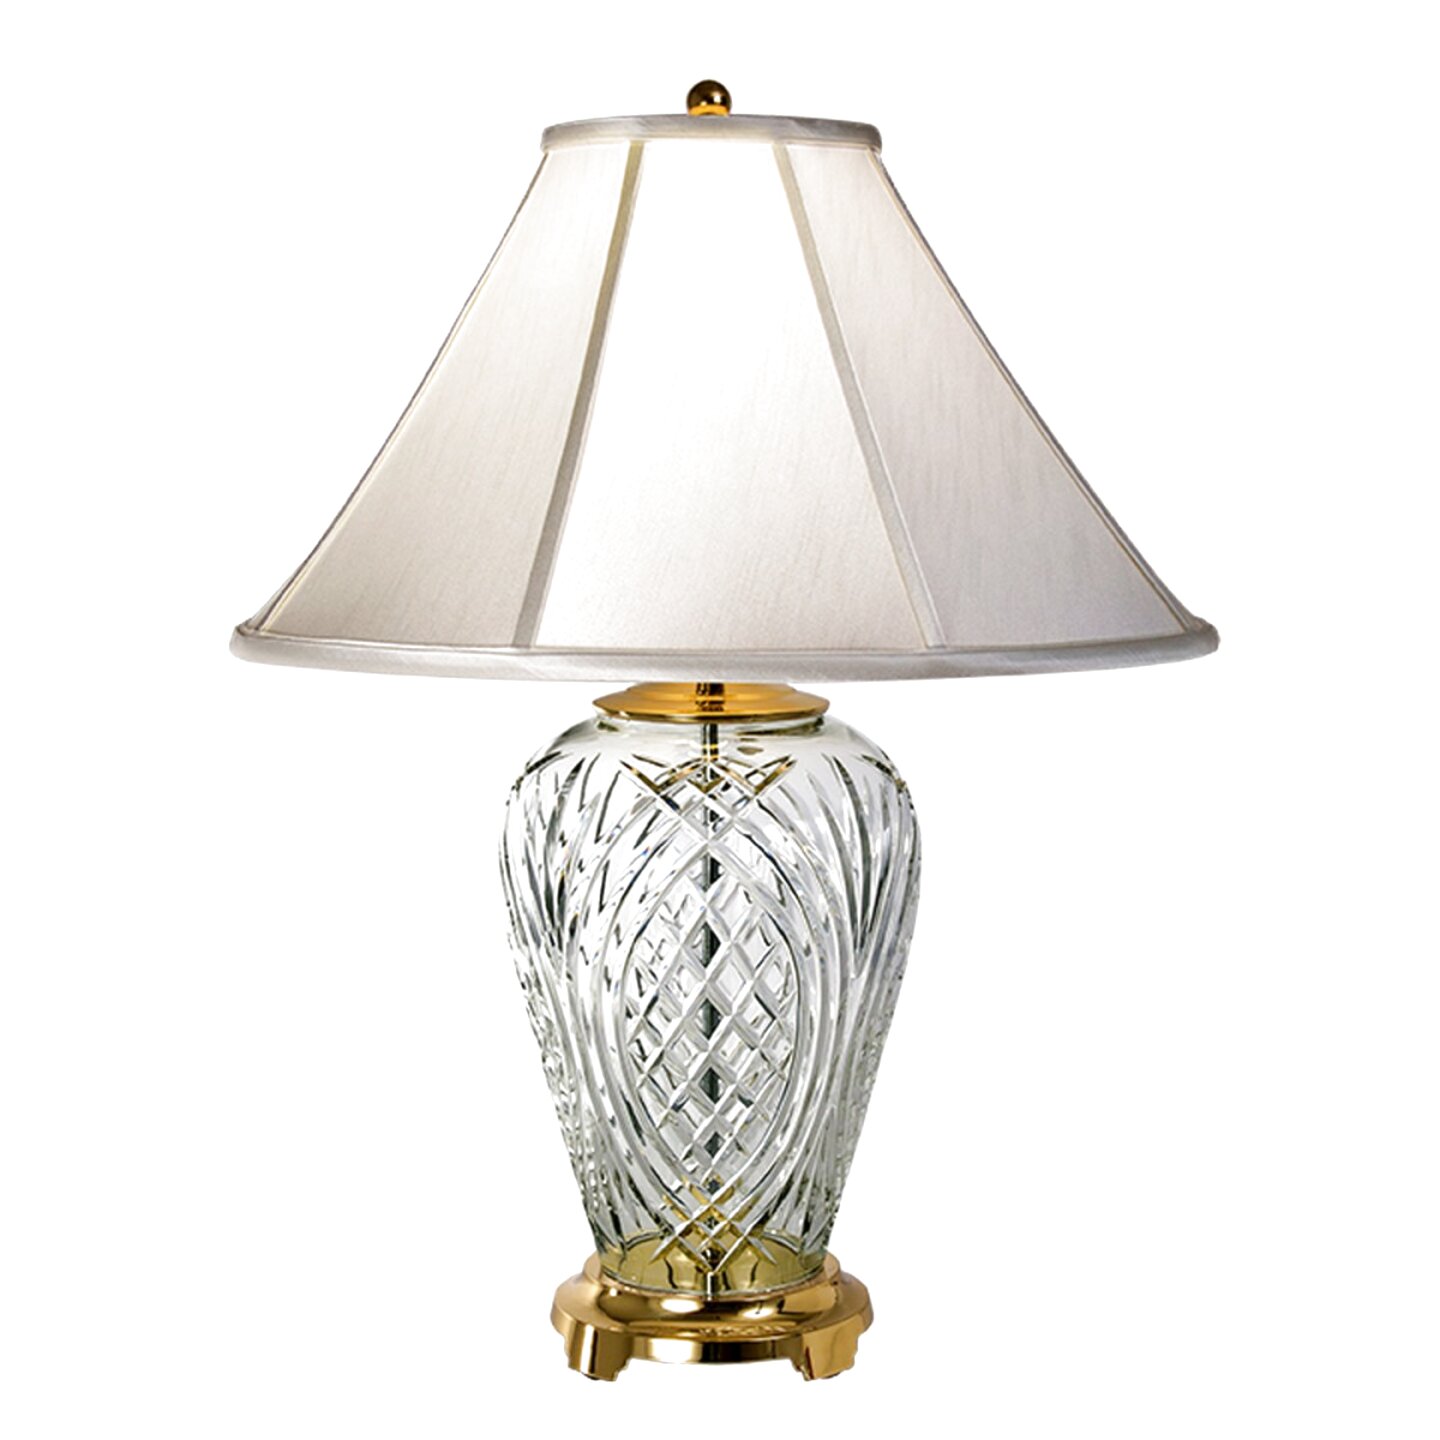 Second Hand Waterford Lamp In Ireland, Waterford Crystal Table Lamps Auction